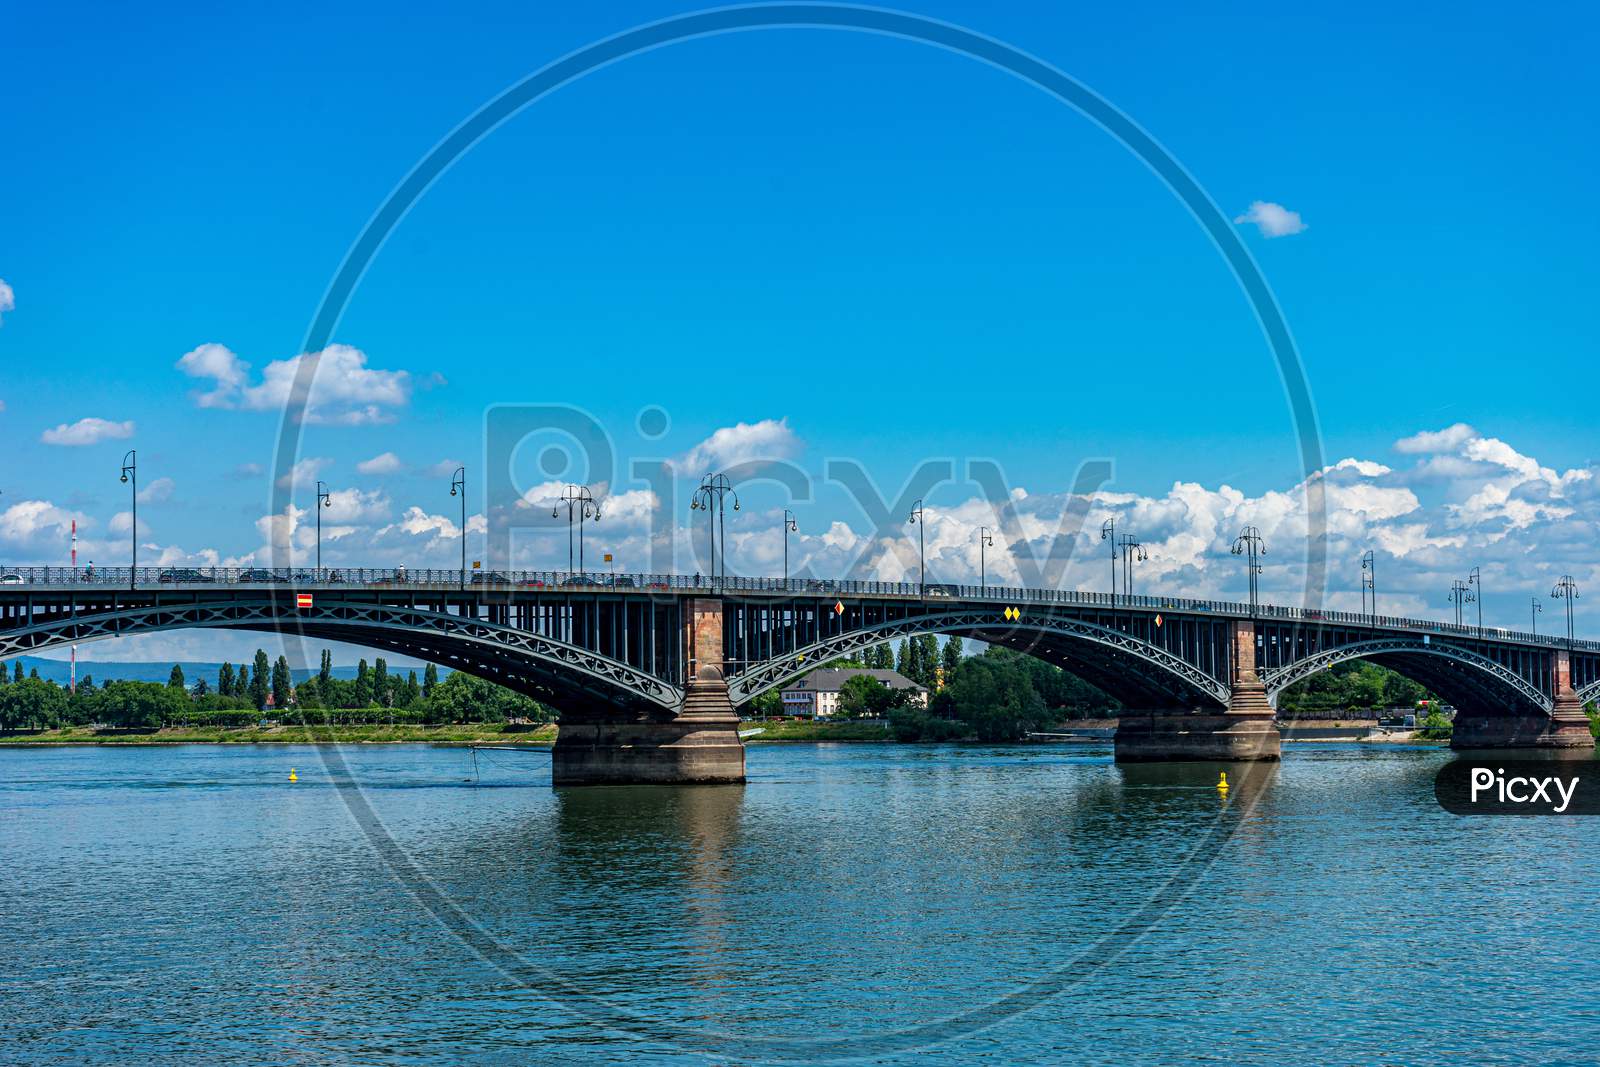 Germany, Heritage Site Mainz, A Train Crossing A Bridge Over Water